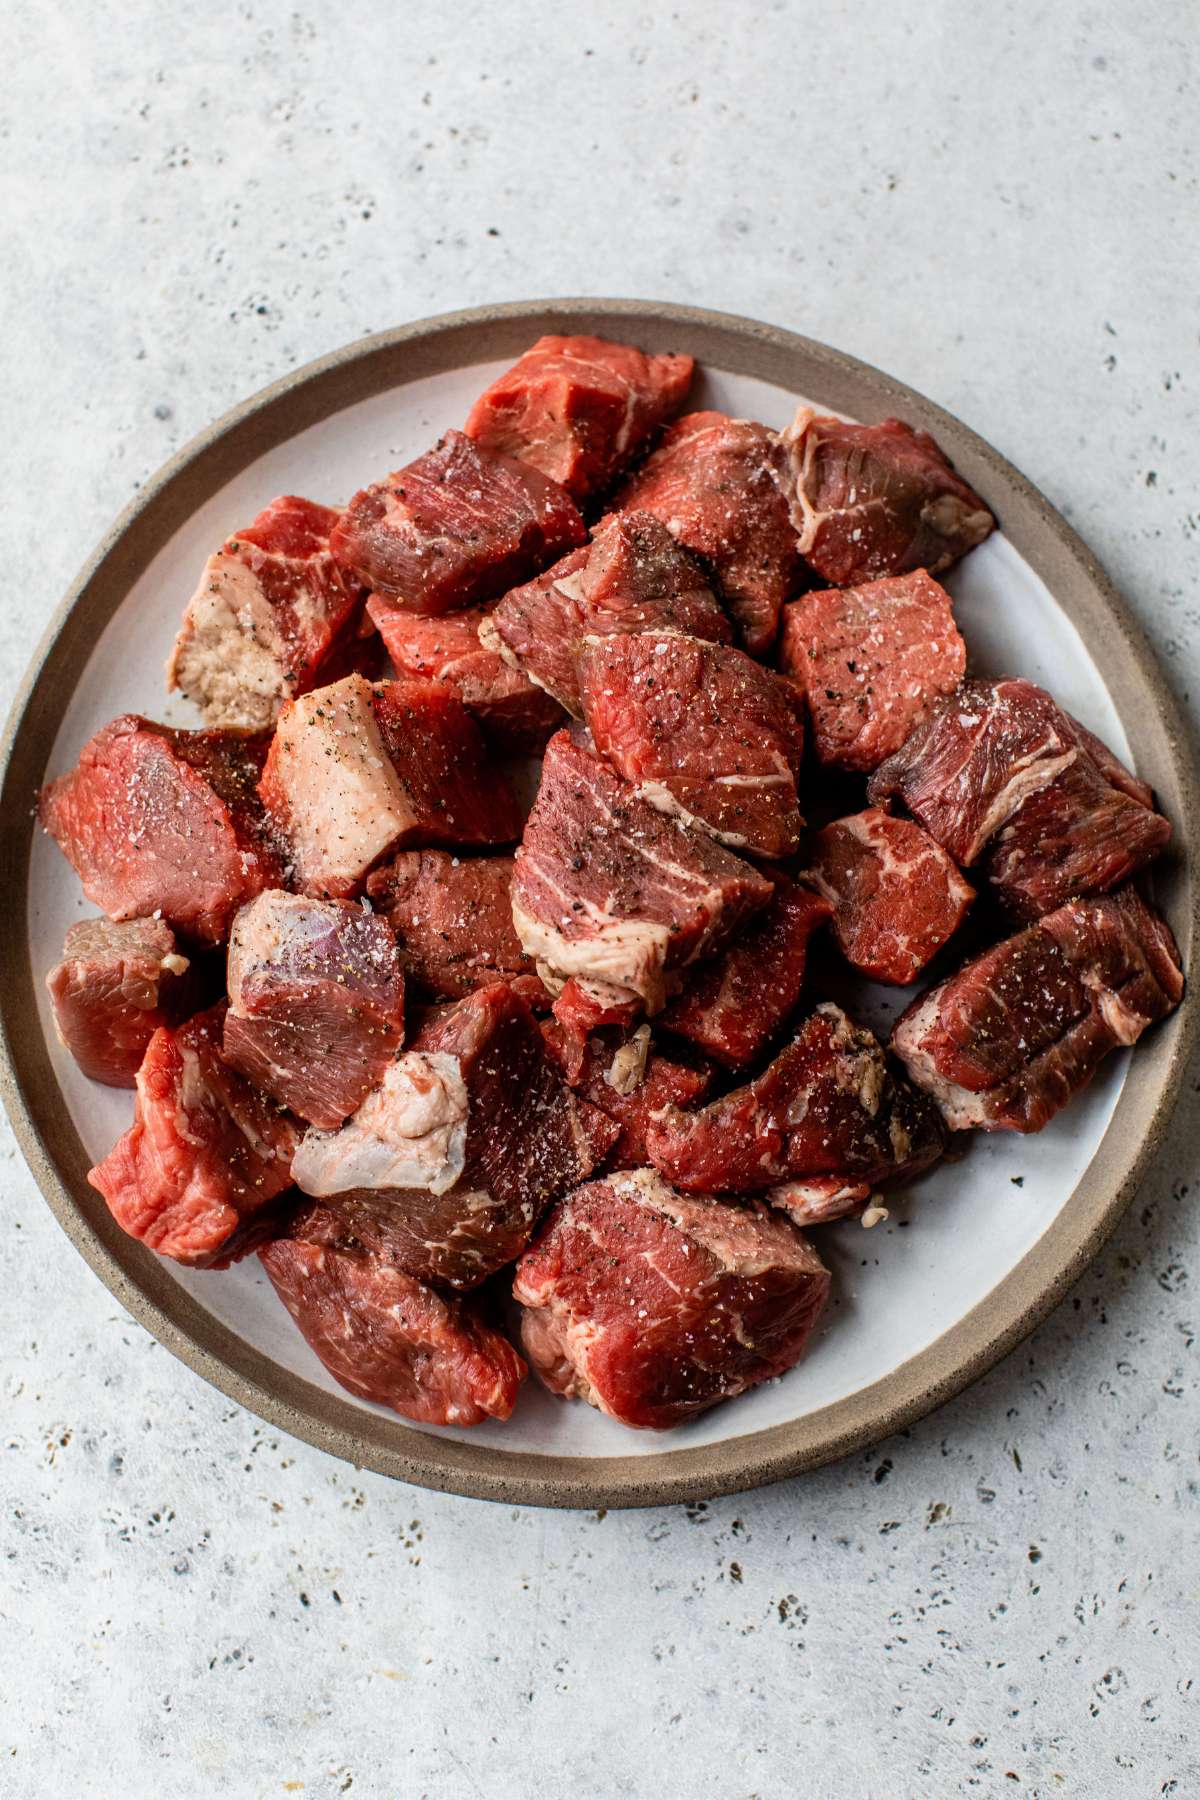 Beef tips on a plate seasoned with salt and pepper.